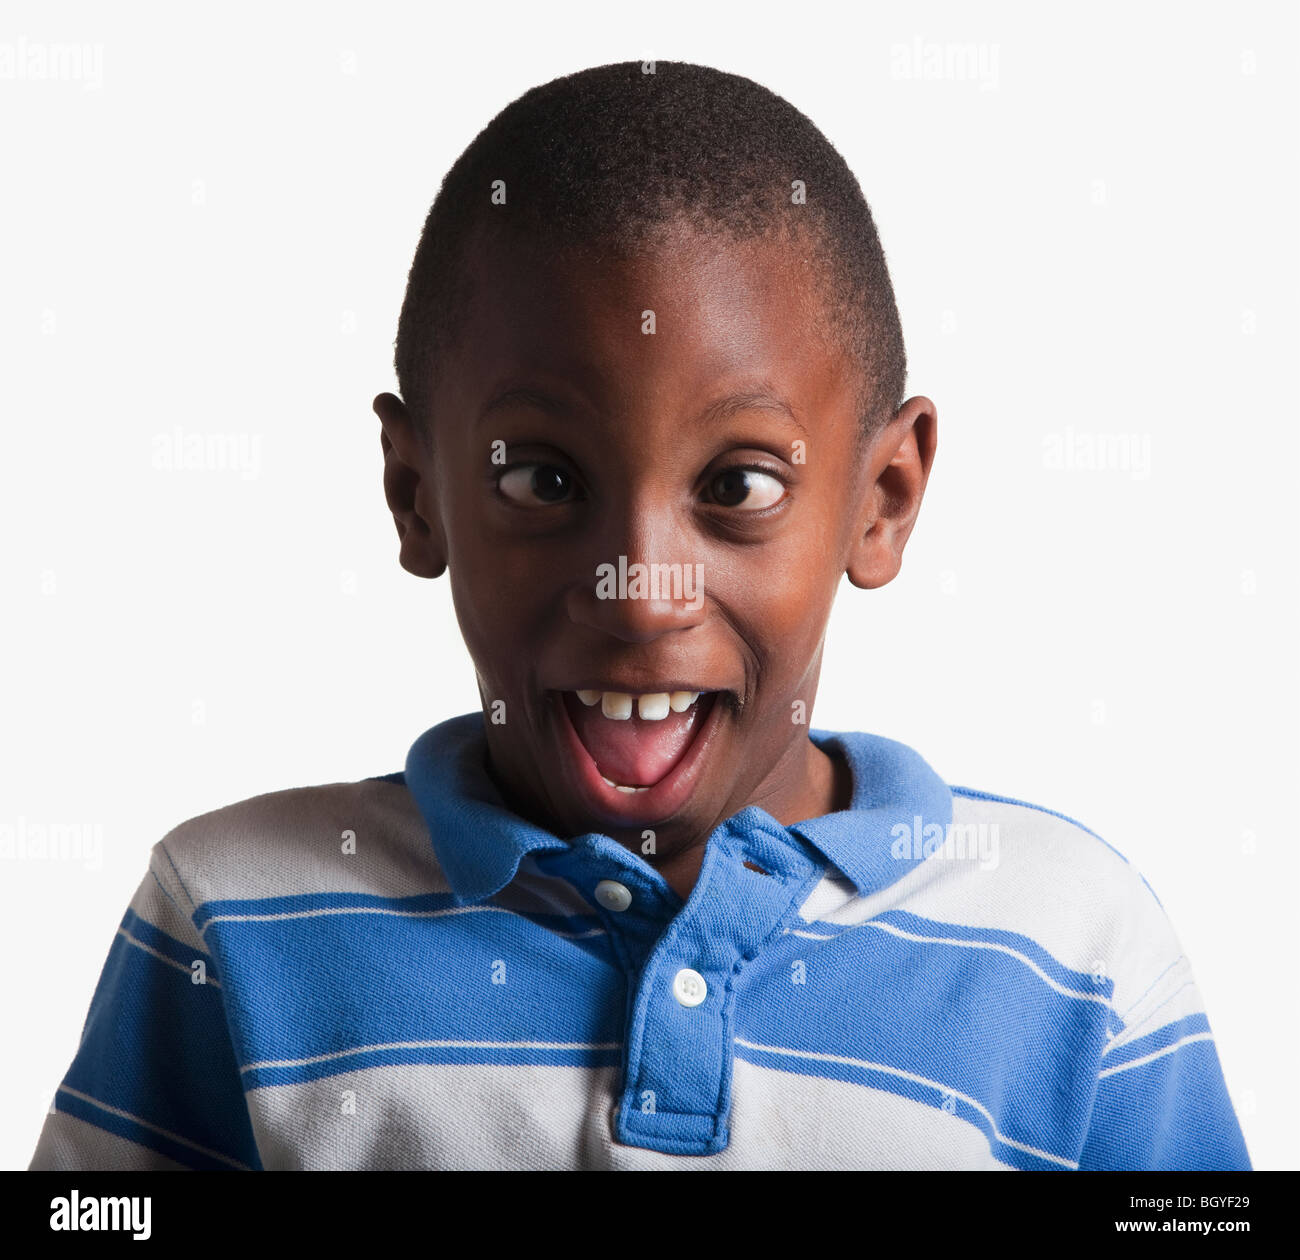 Portrait of boy making silly face Stock Photo